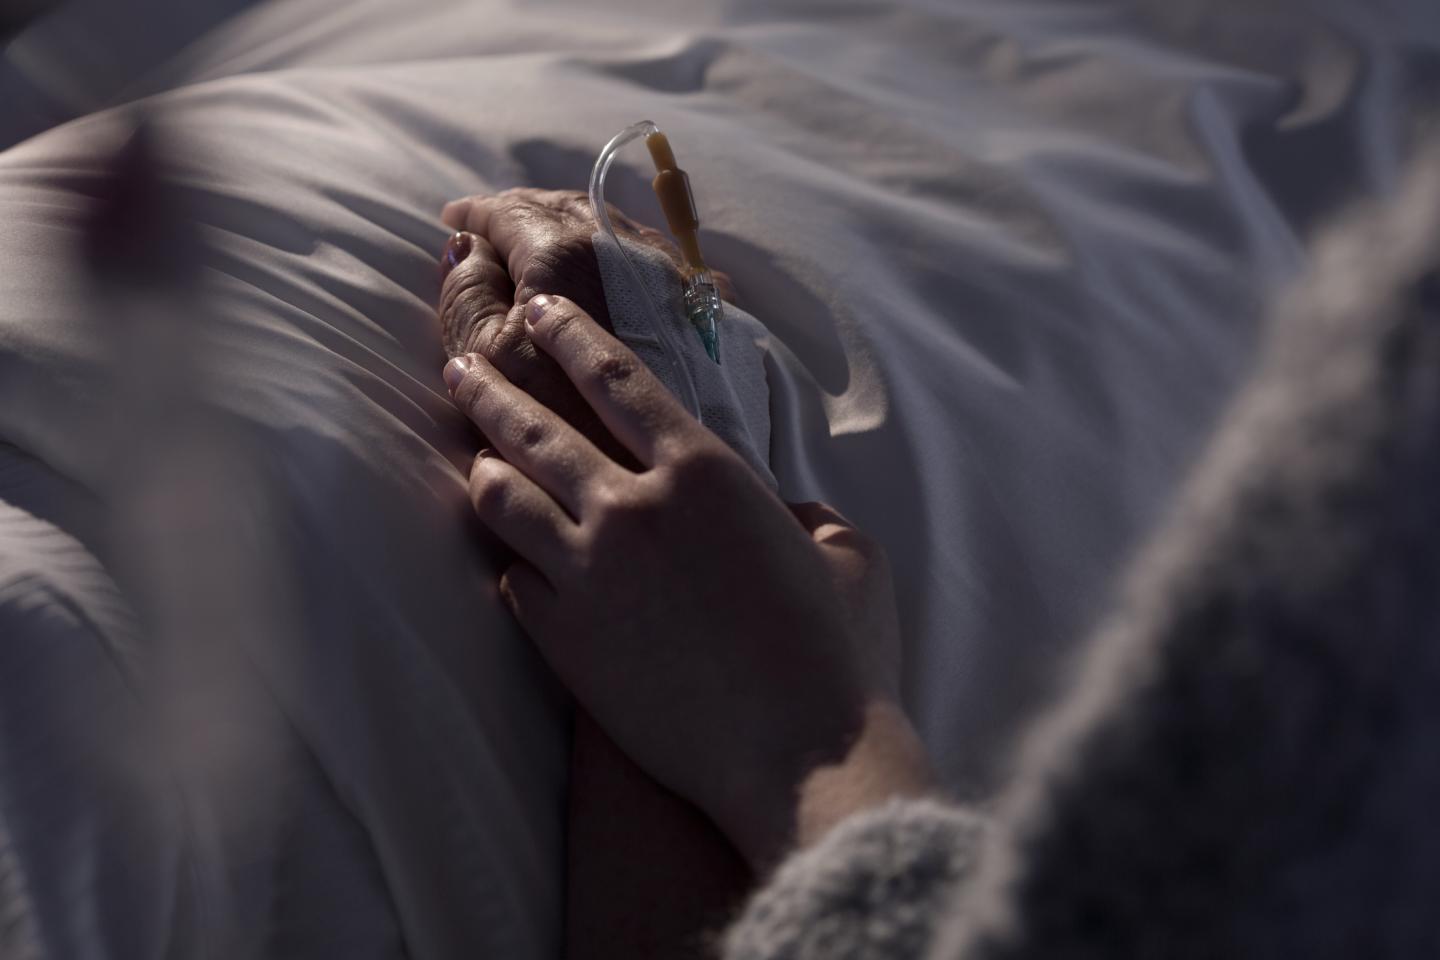 Dying Patients Who Received Palliative Care Visit the ER Less